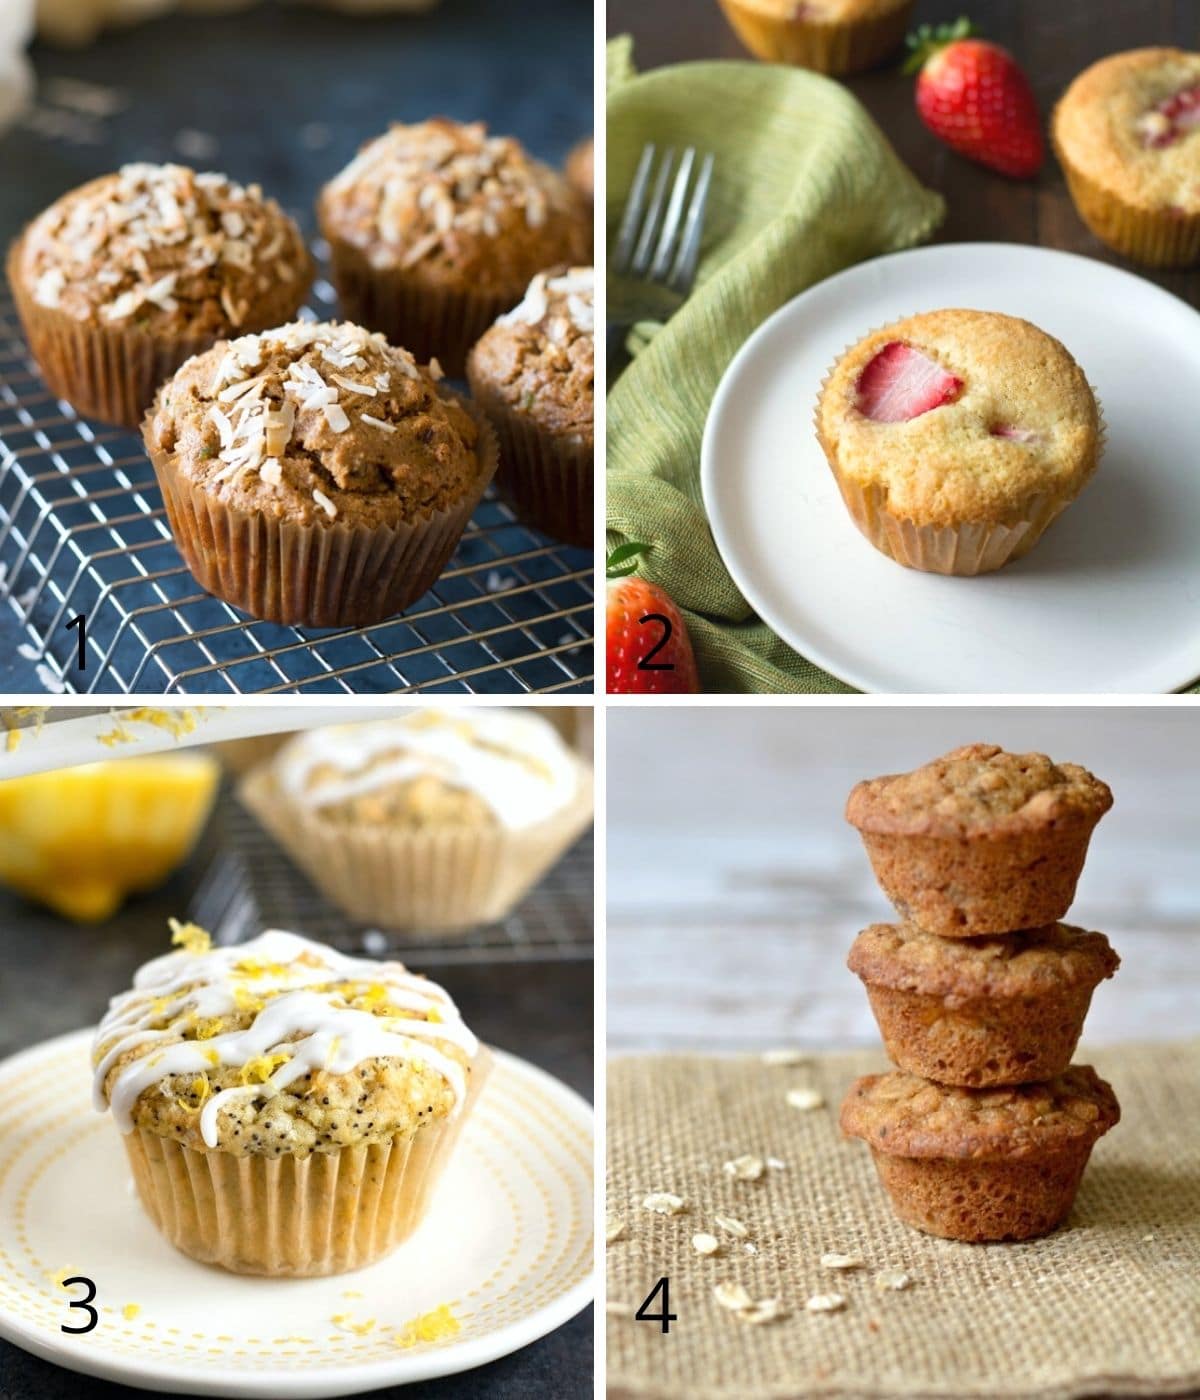 photos of the muffins.